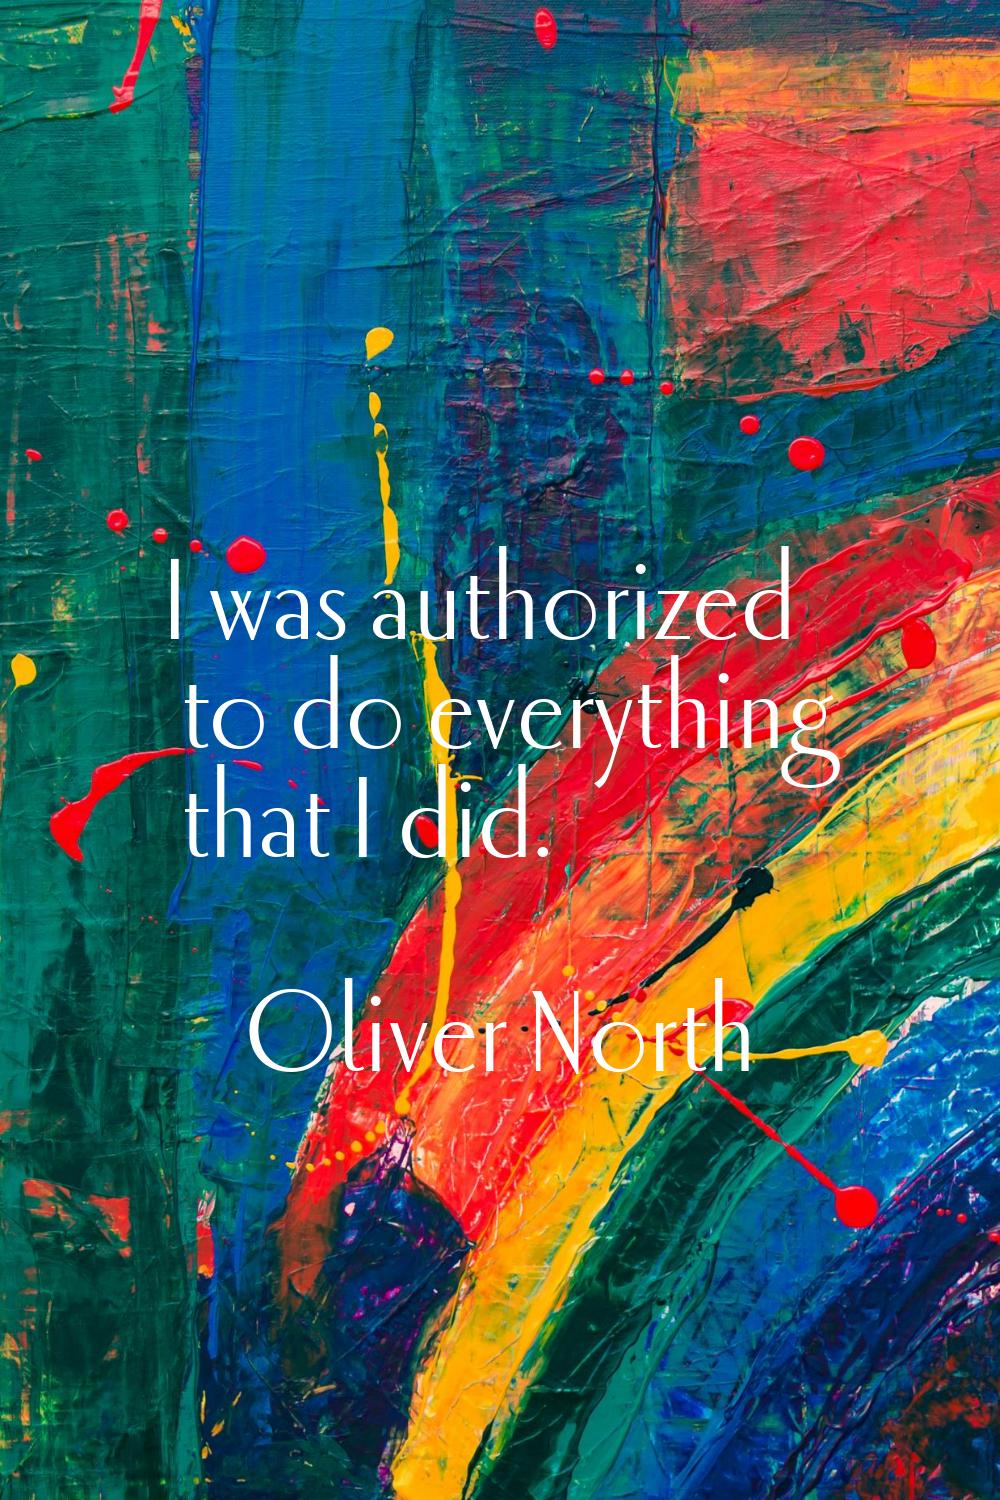 I was authorized to do everything that I did.